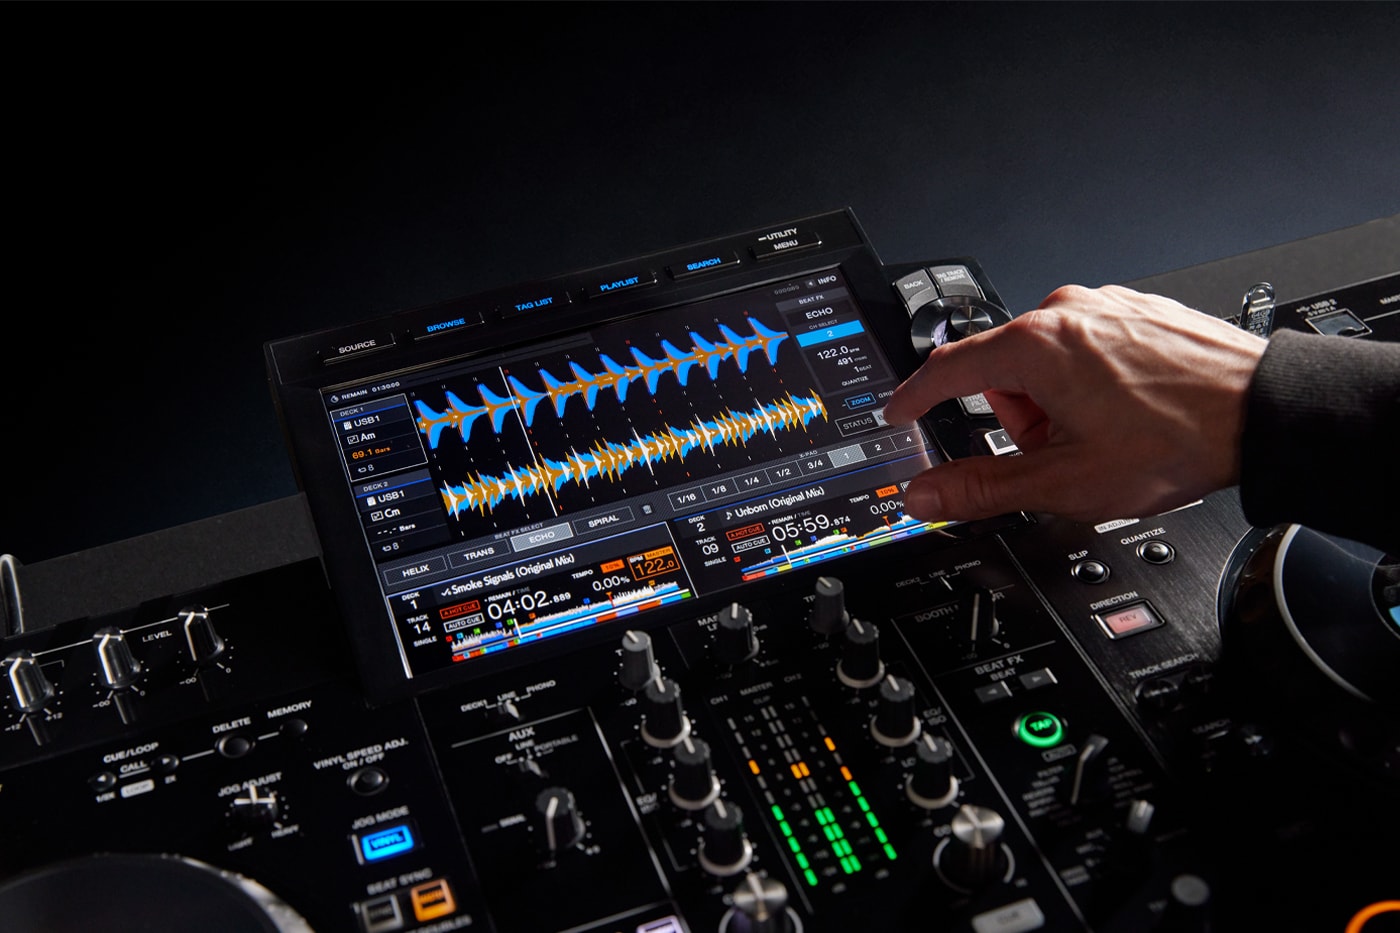 Pioneer DJ Introduces All-In-One XDJ-RX3 System